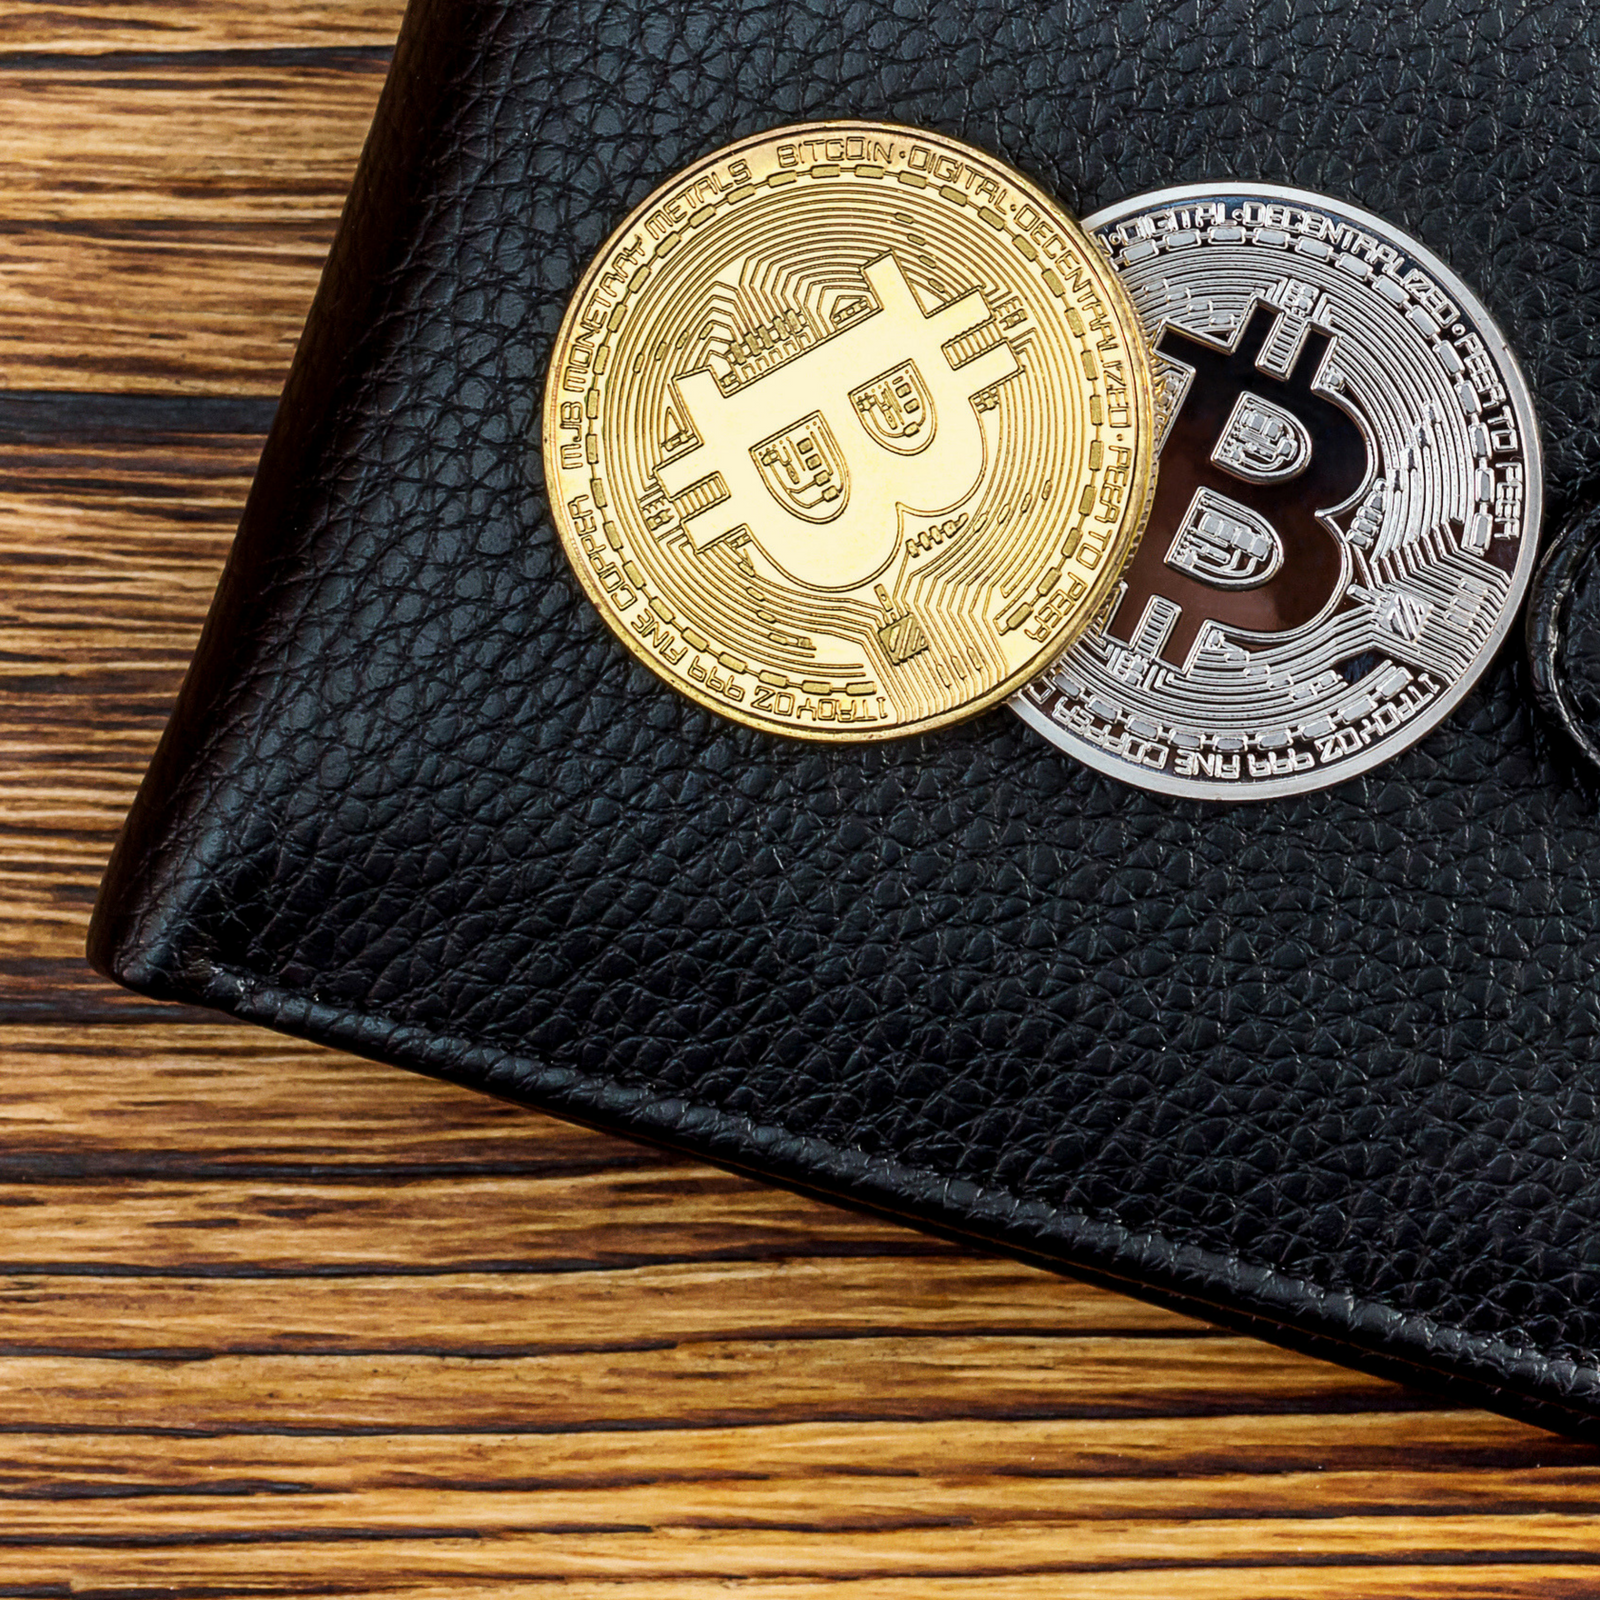 Edge Wallet Goes Live, Includes Bitcoin Cash